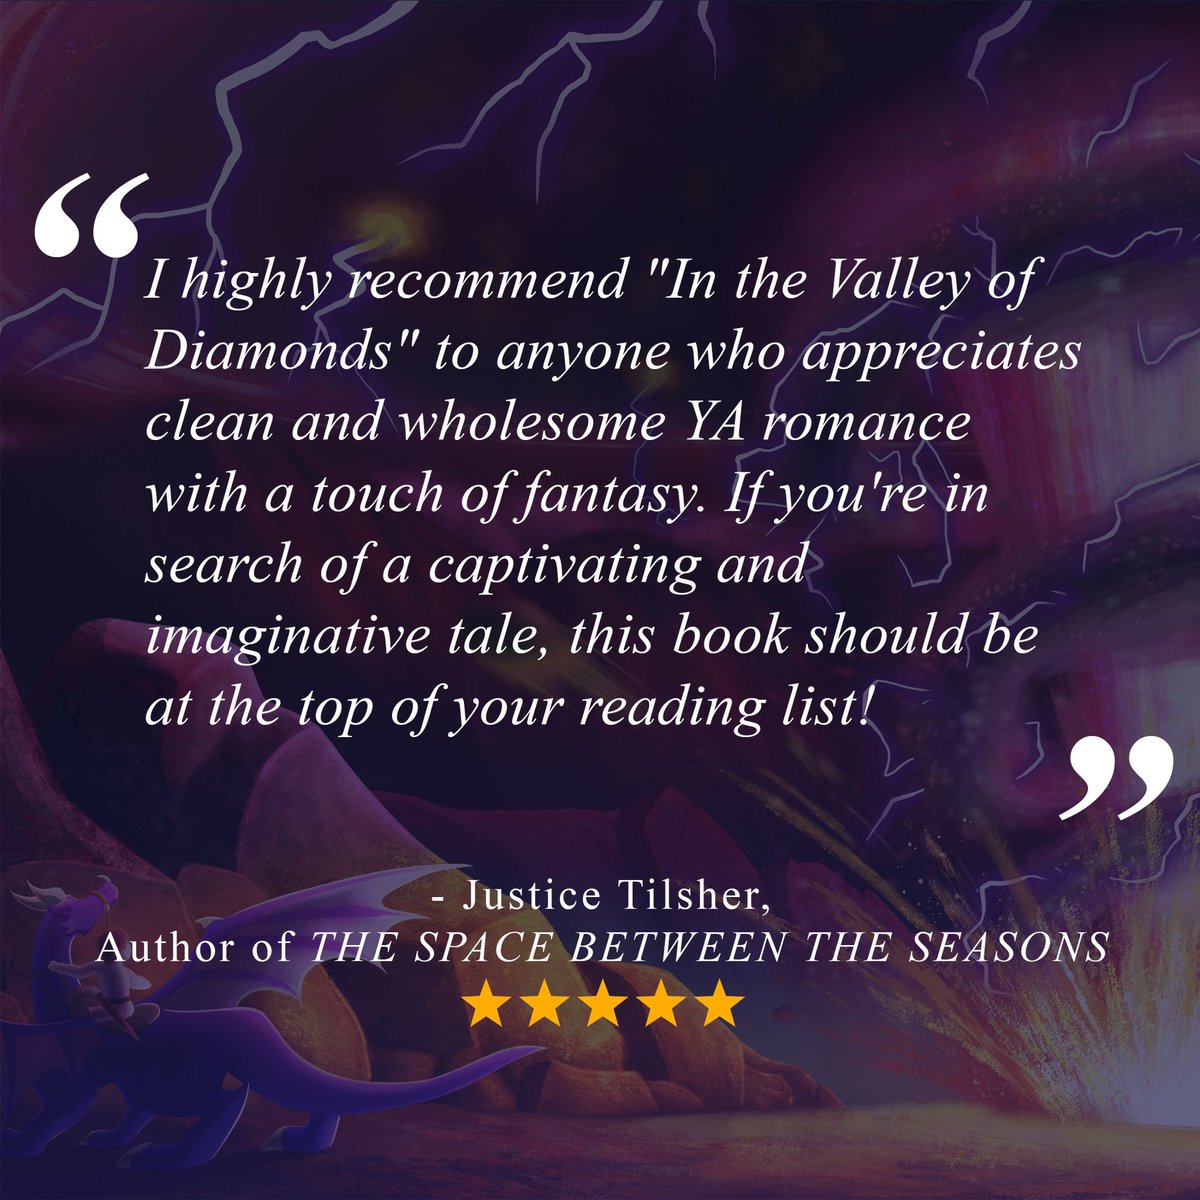 A review for IN THE VALLEY OF DIAMONDS! 😄💎
Catch ya later! 😉
…
#book #bookreview #ya #youngadult #youngadultfantasy #youngadultromance #fantasy #writer #author #catchyalater